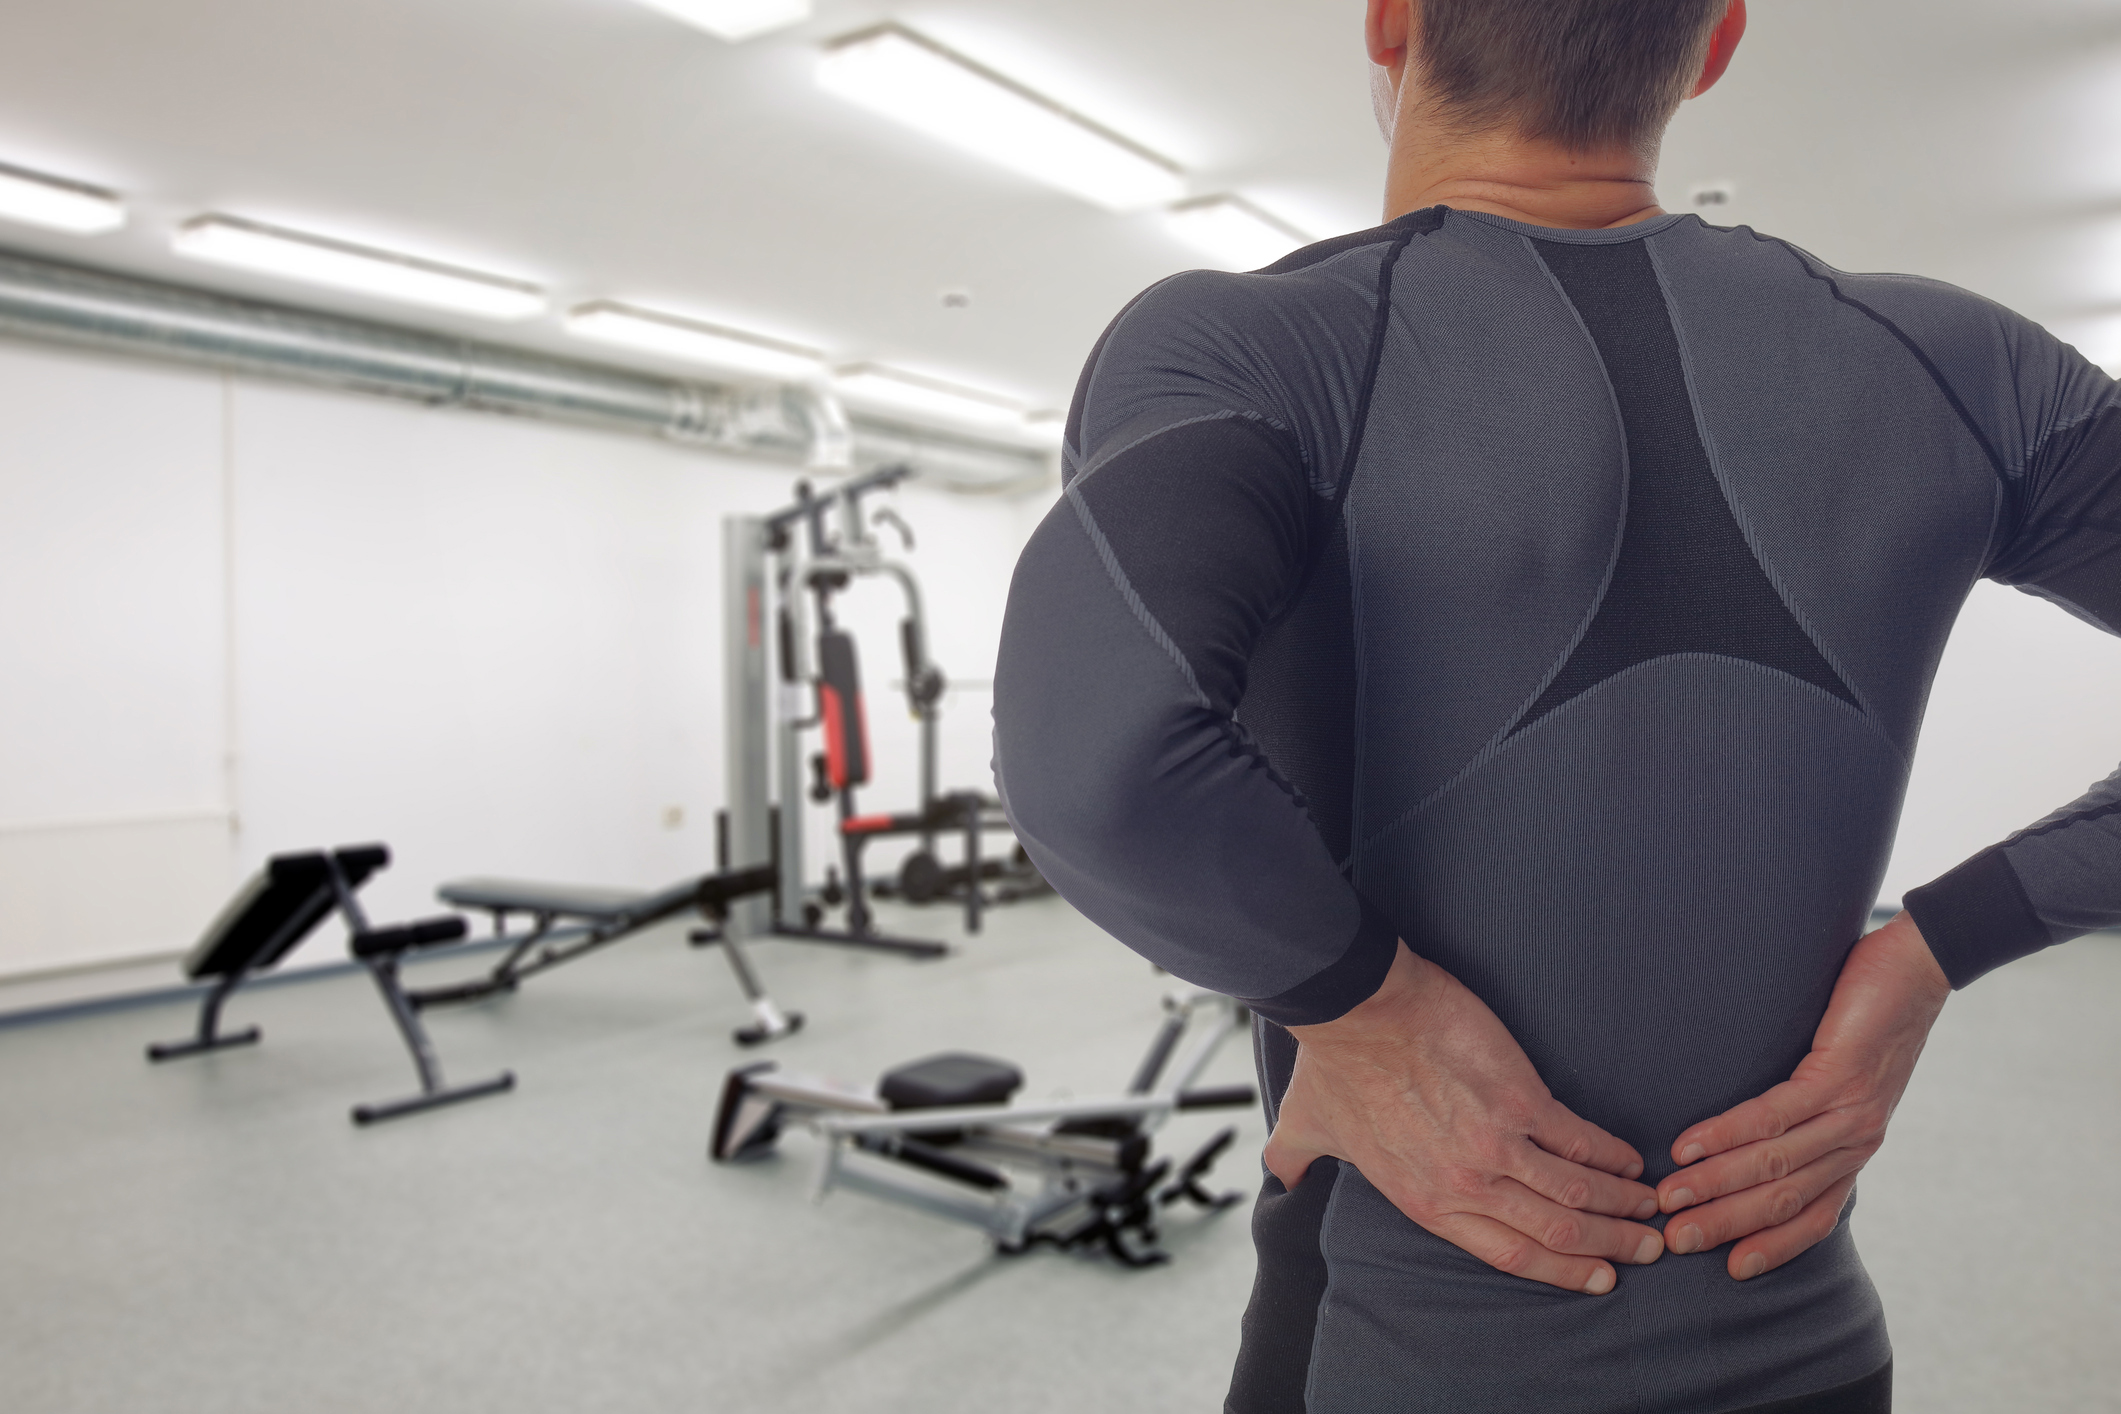 backpain in the gym (Thinkstock/PA)